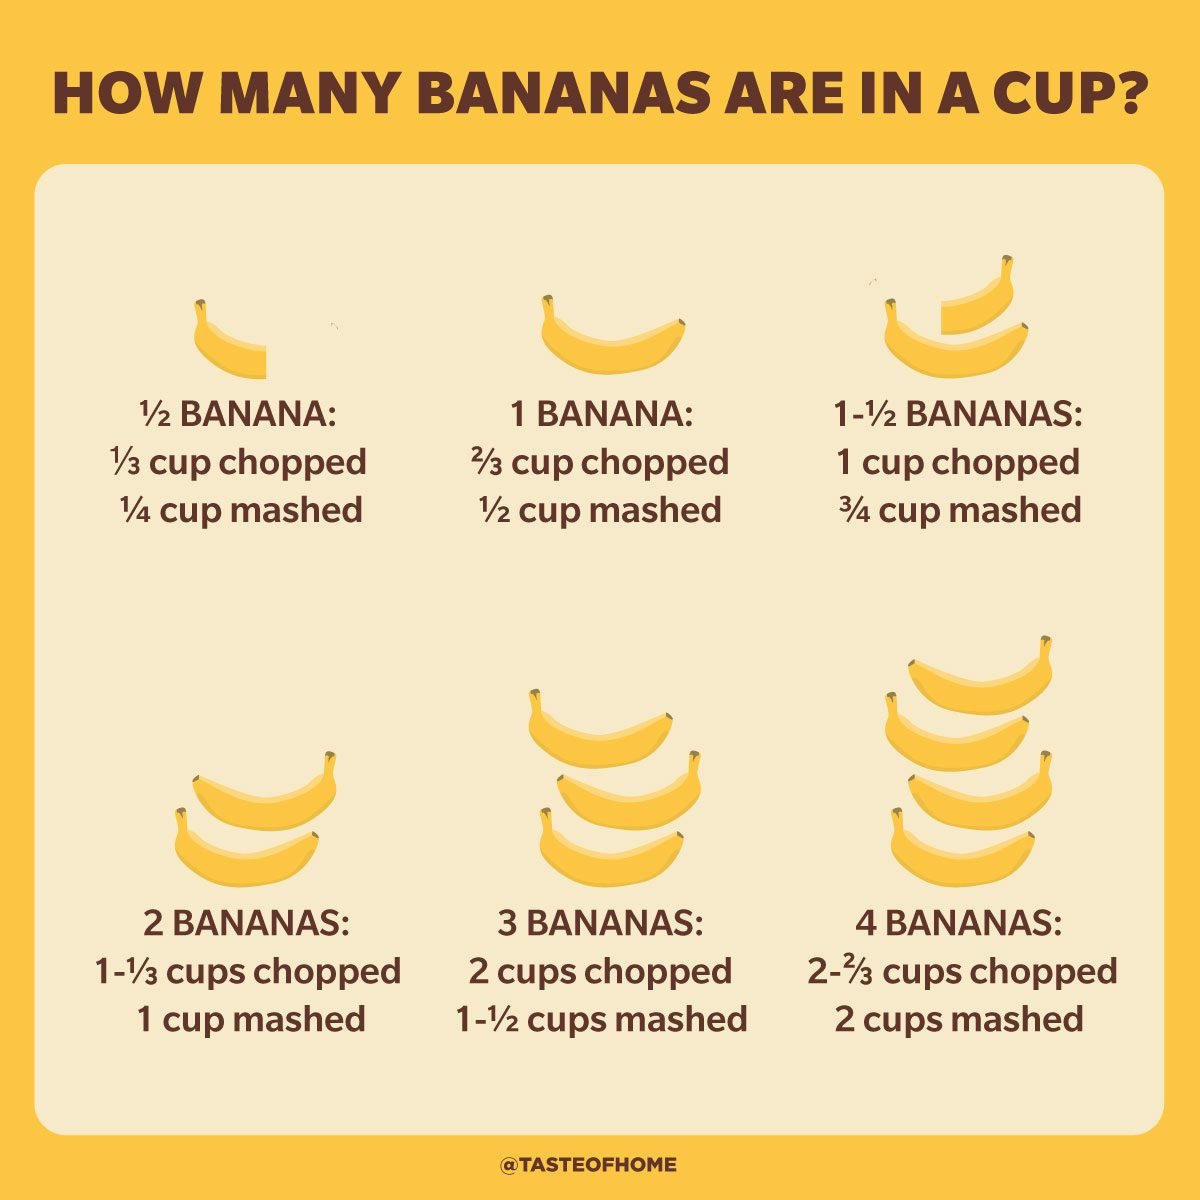 https://www.tasteofhome.com/wp-content/uploads/2022/03/How-Many-Bananas-Are-in-a-Cup.jpg?fit=680%2C680